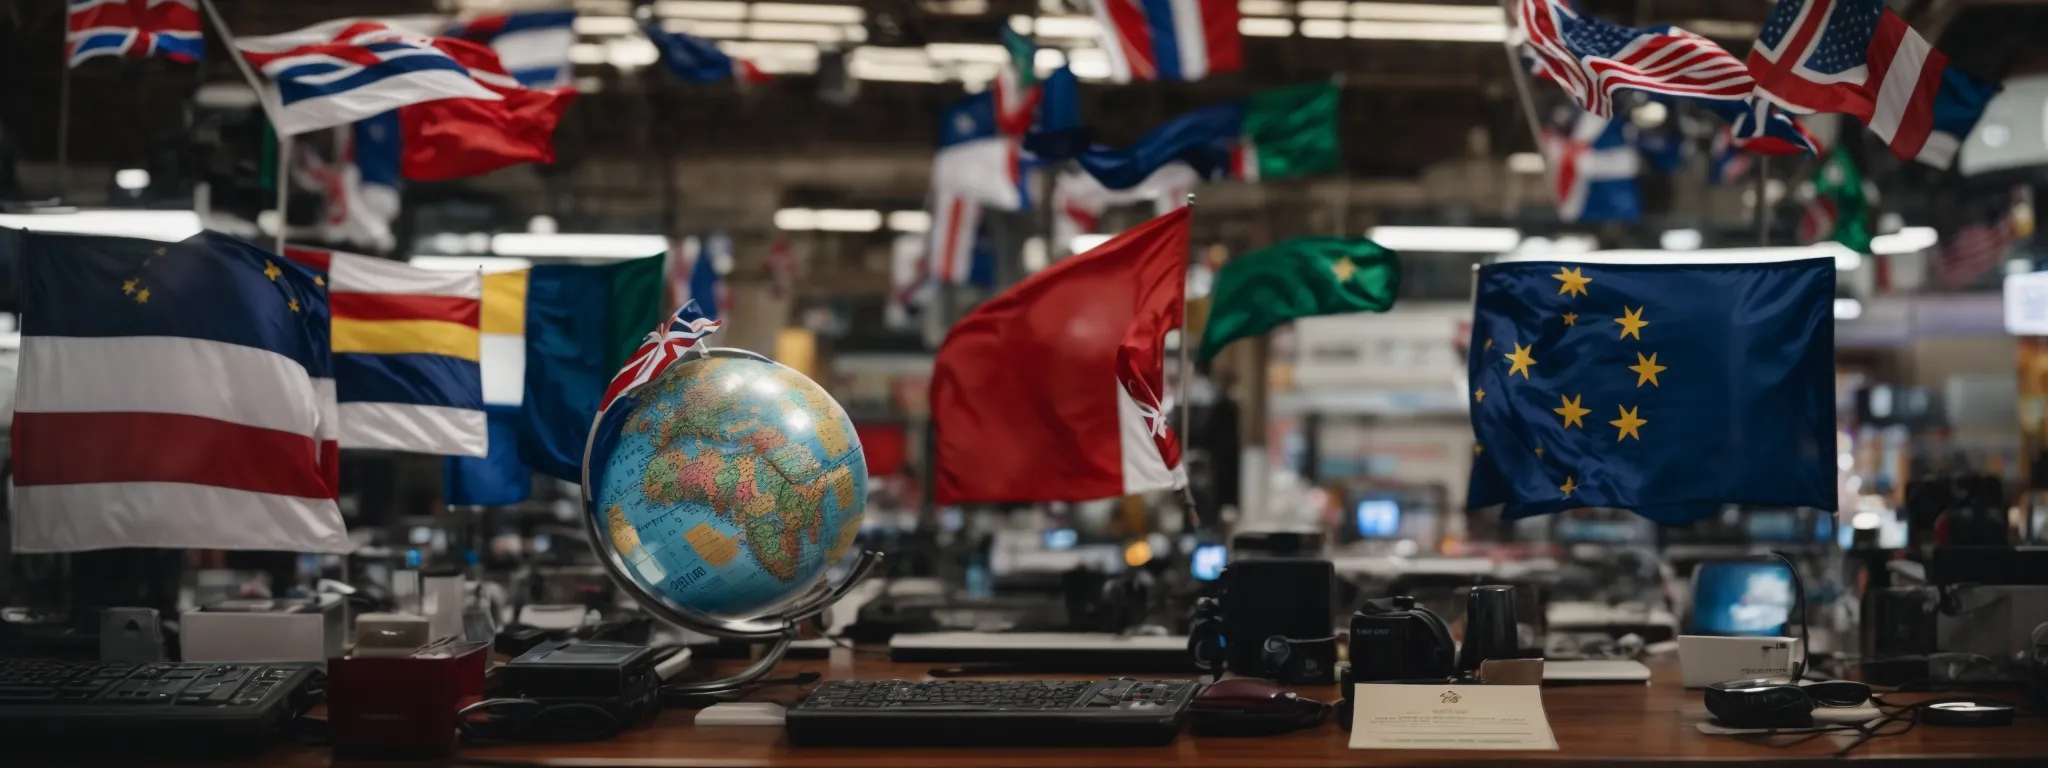 a globe surrounded by various national flags, with a computer displaying a website's analytics dashboard in the background.